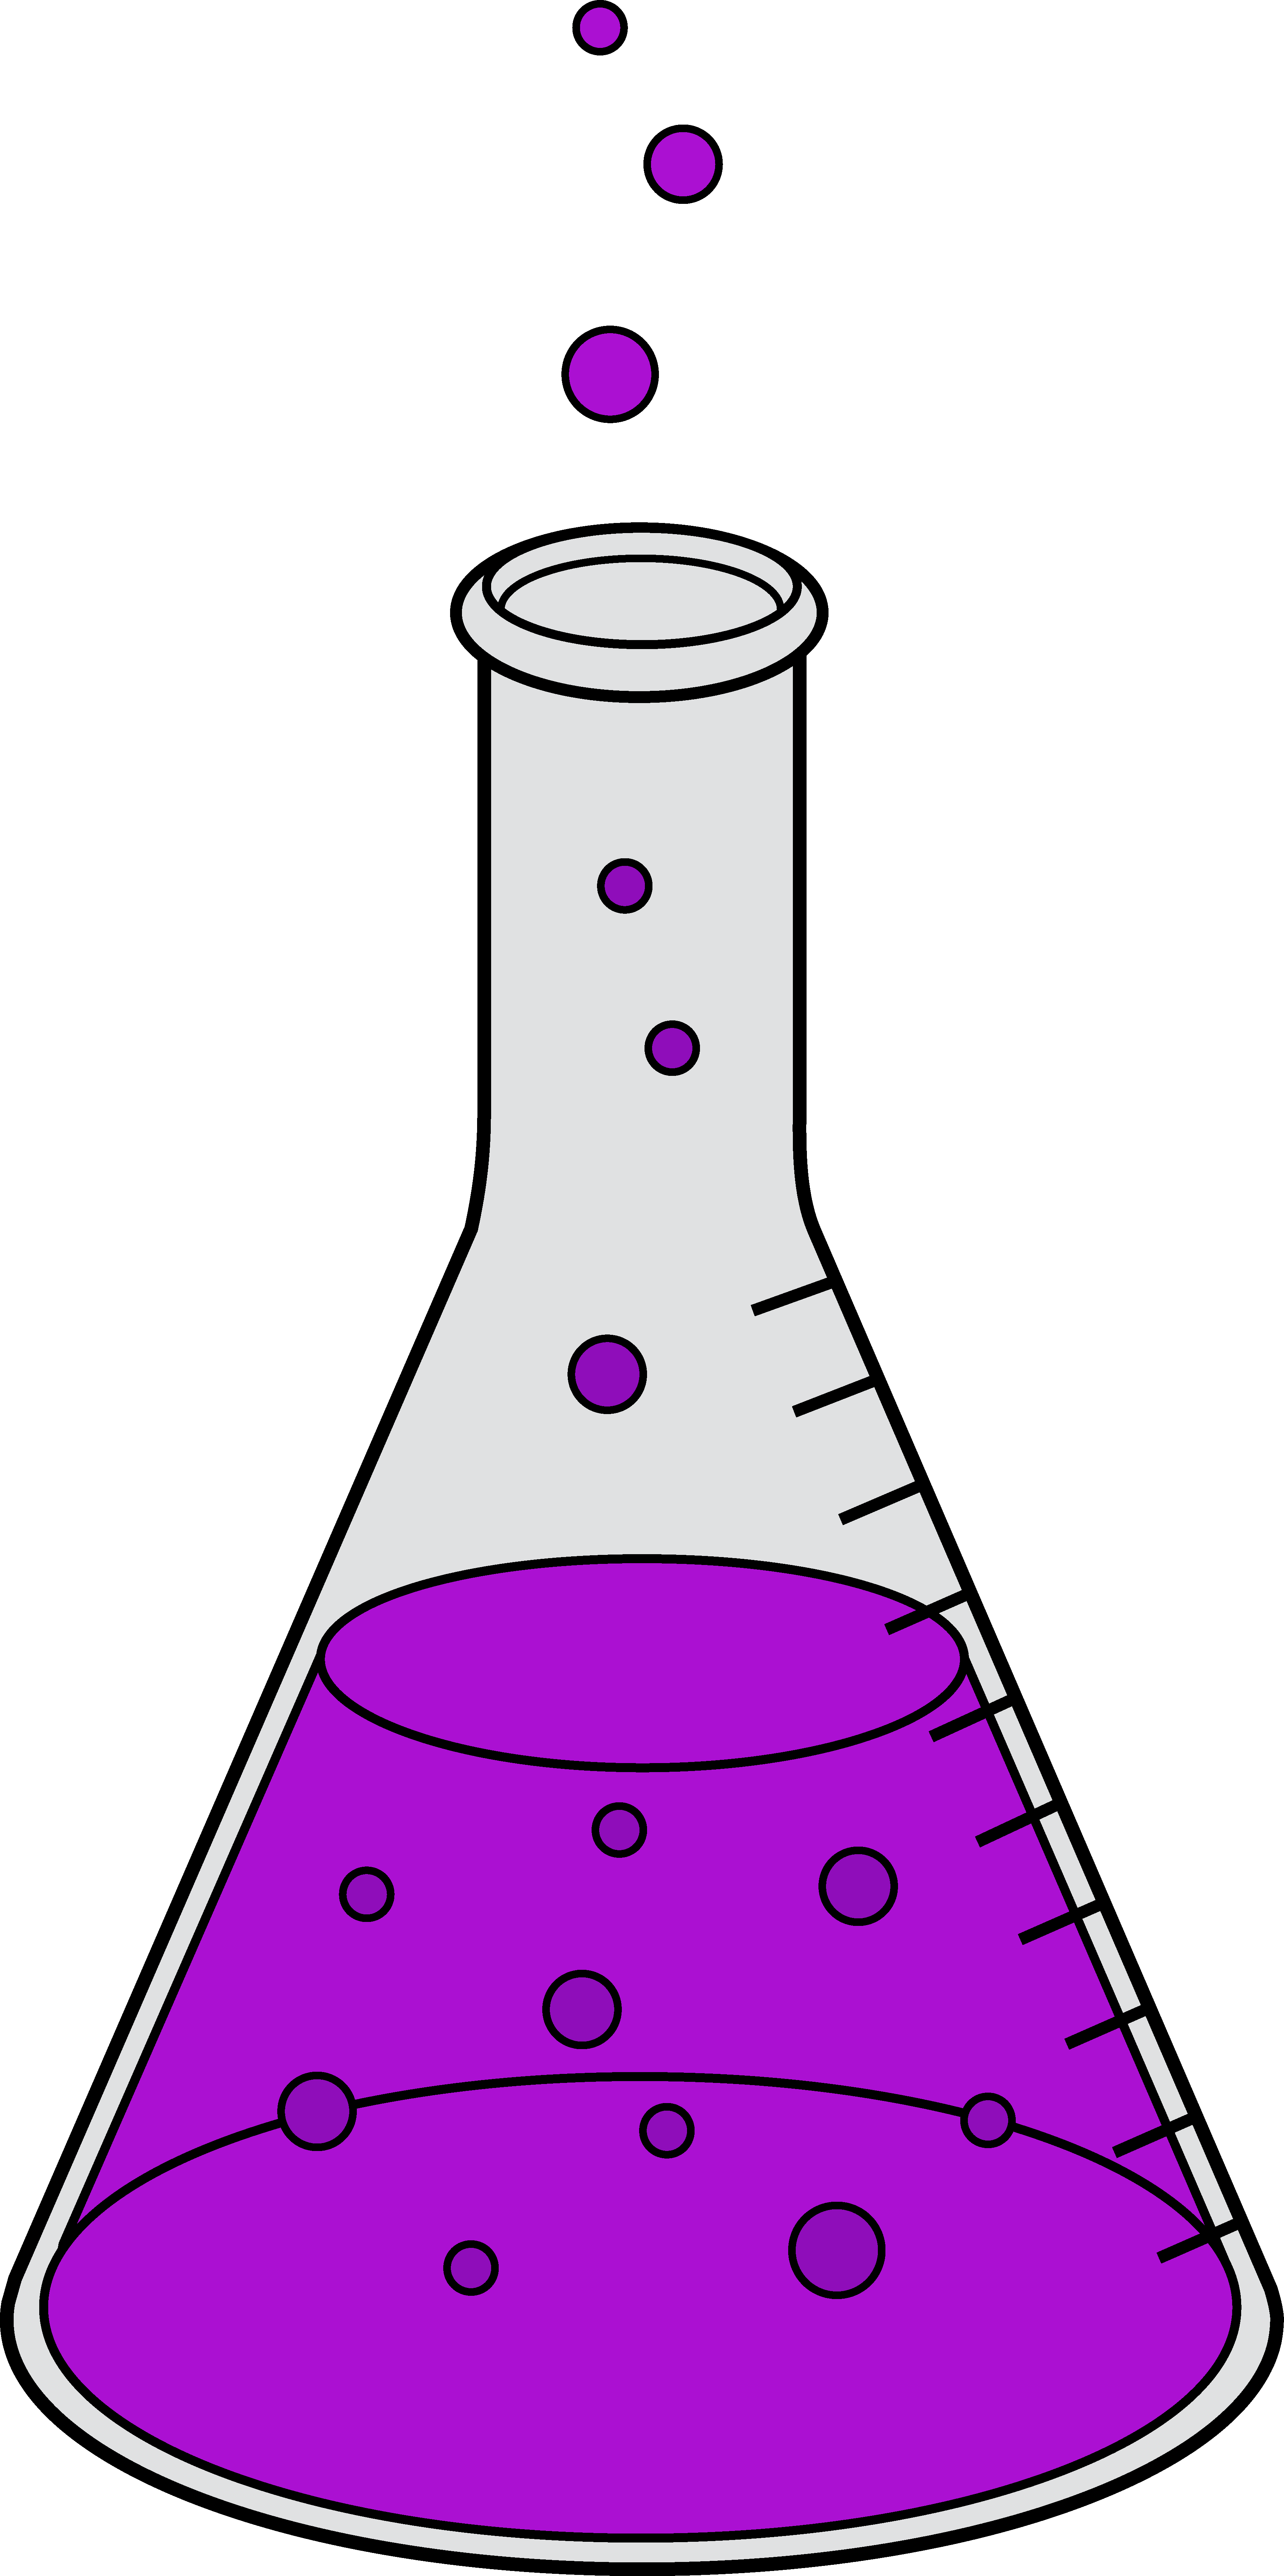 Chemistry Beaker Images & Pictures - Becuo